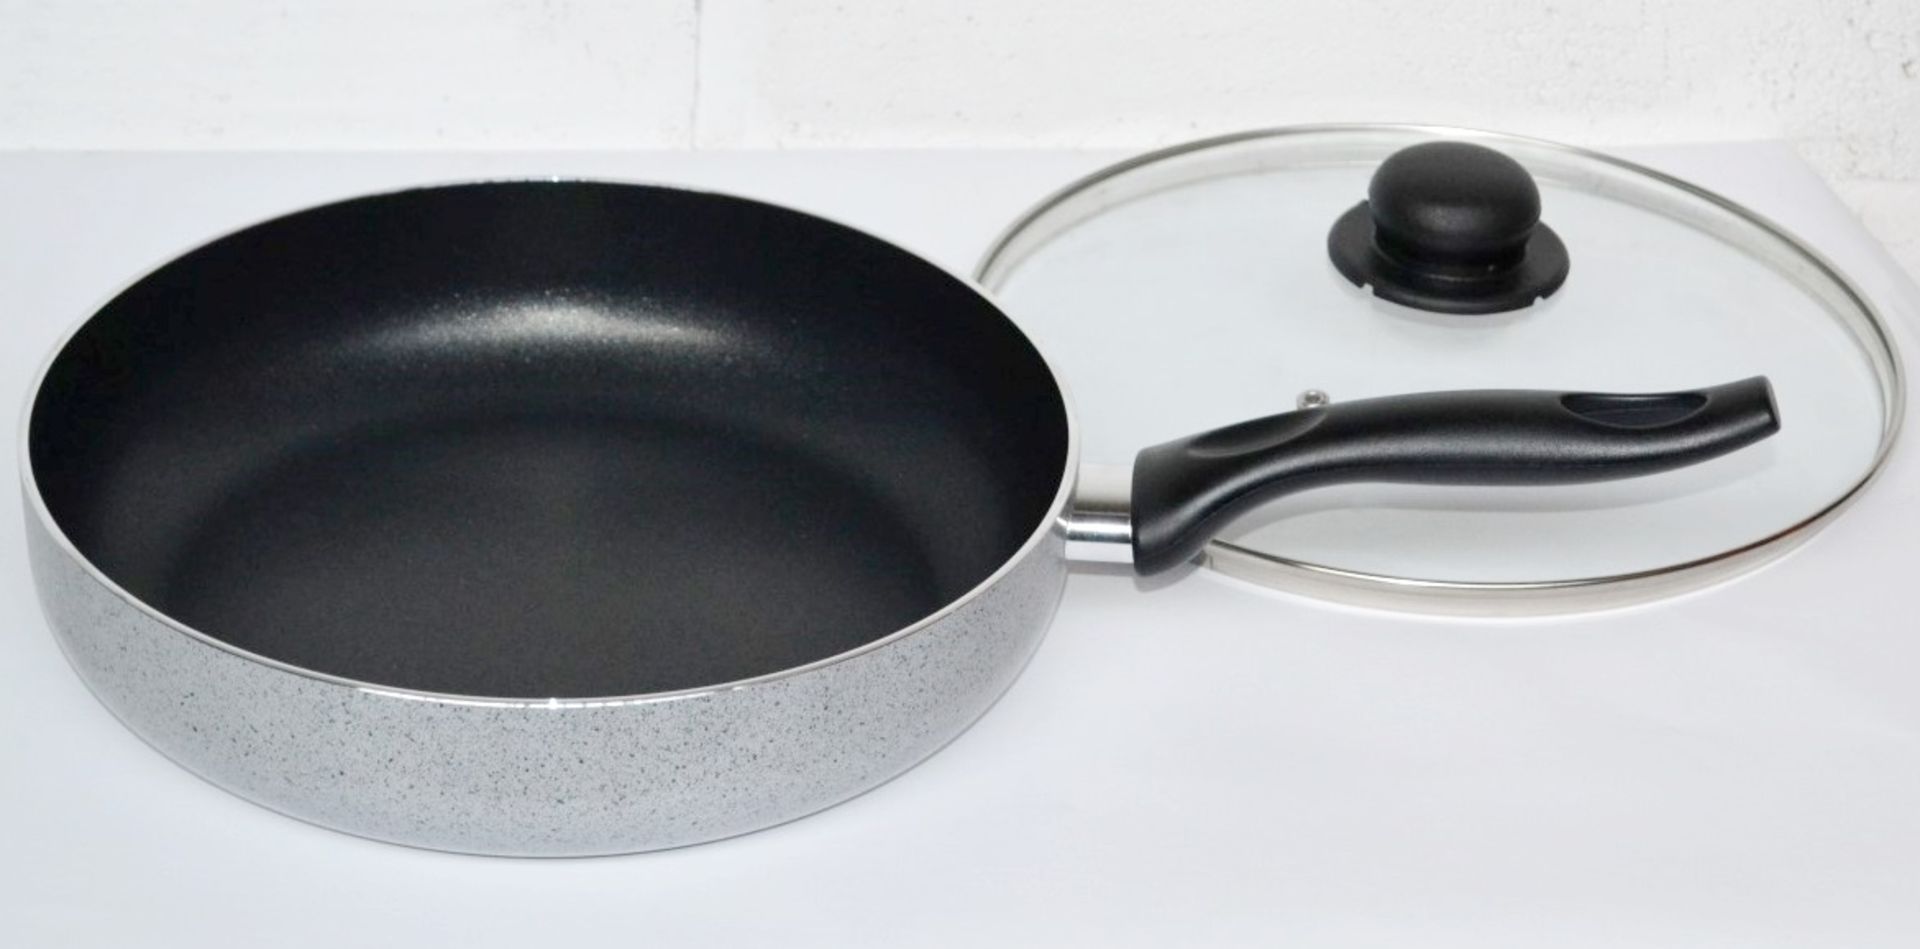 1 x 28cm Non-stick Frying Pans with Glass Lids - Colour: Black - Made In Italy - New & Sealed Stock, - Bild 4 aus 5